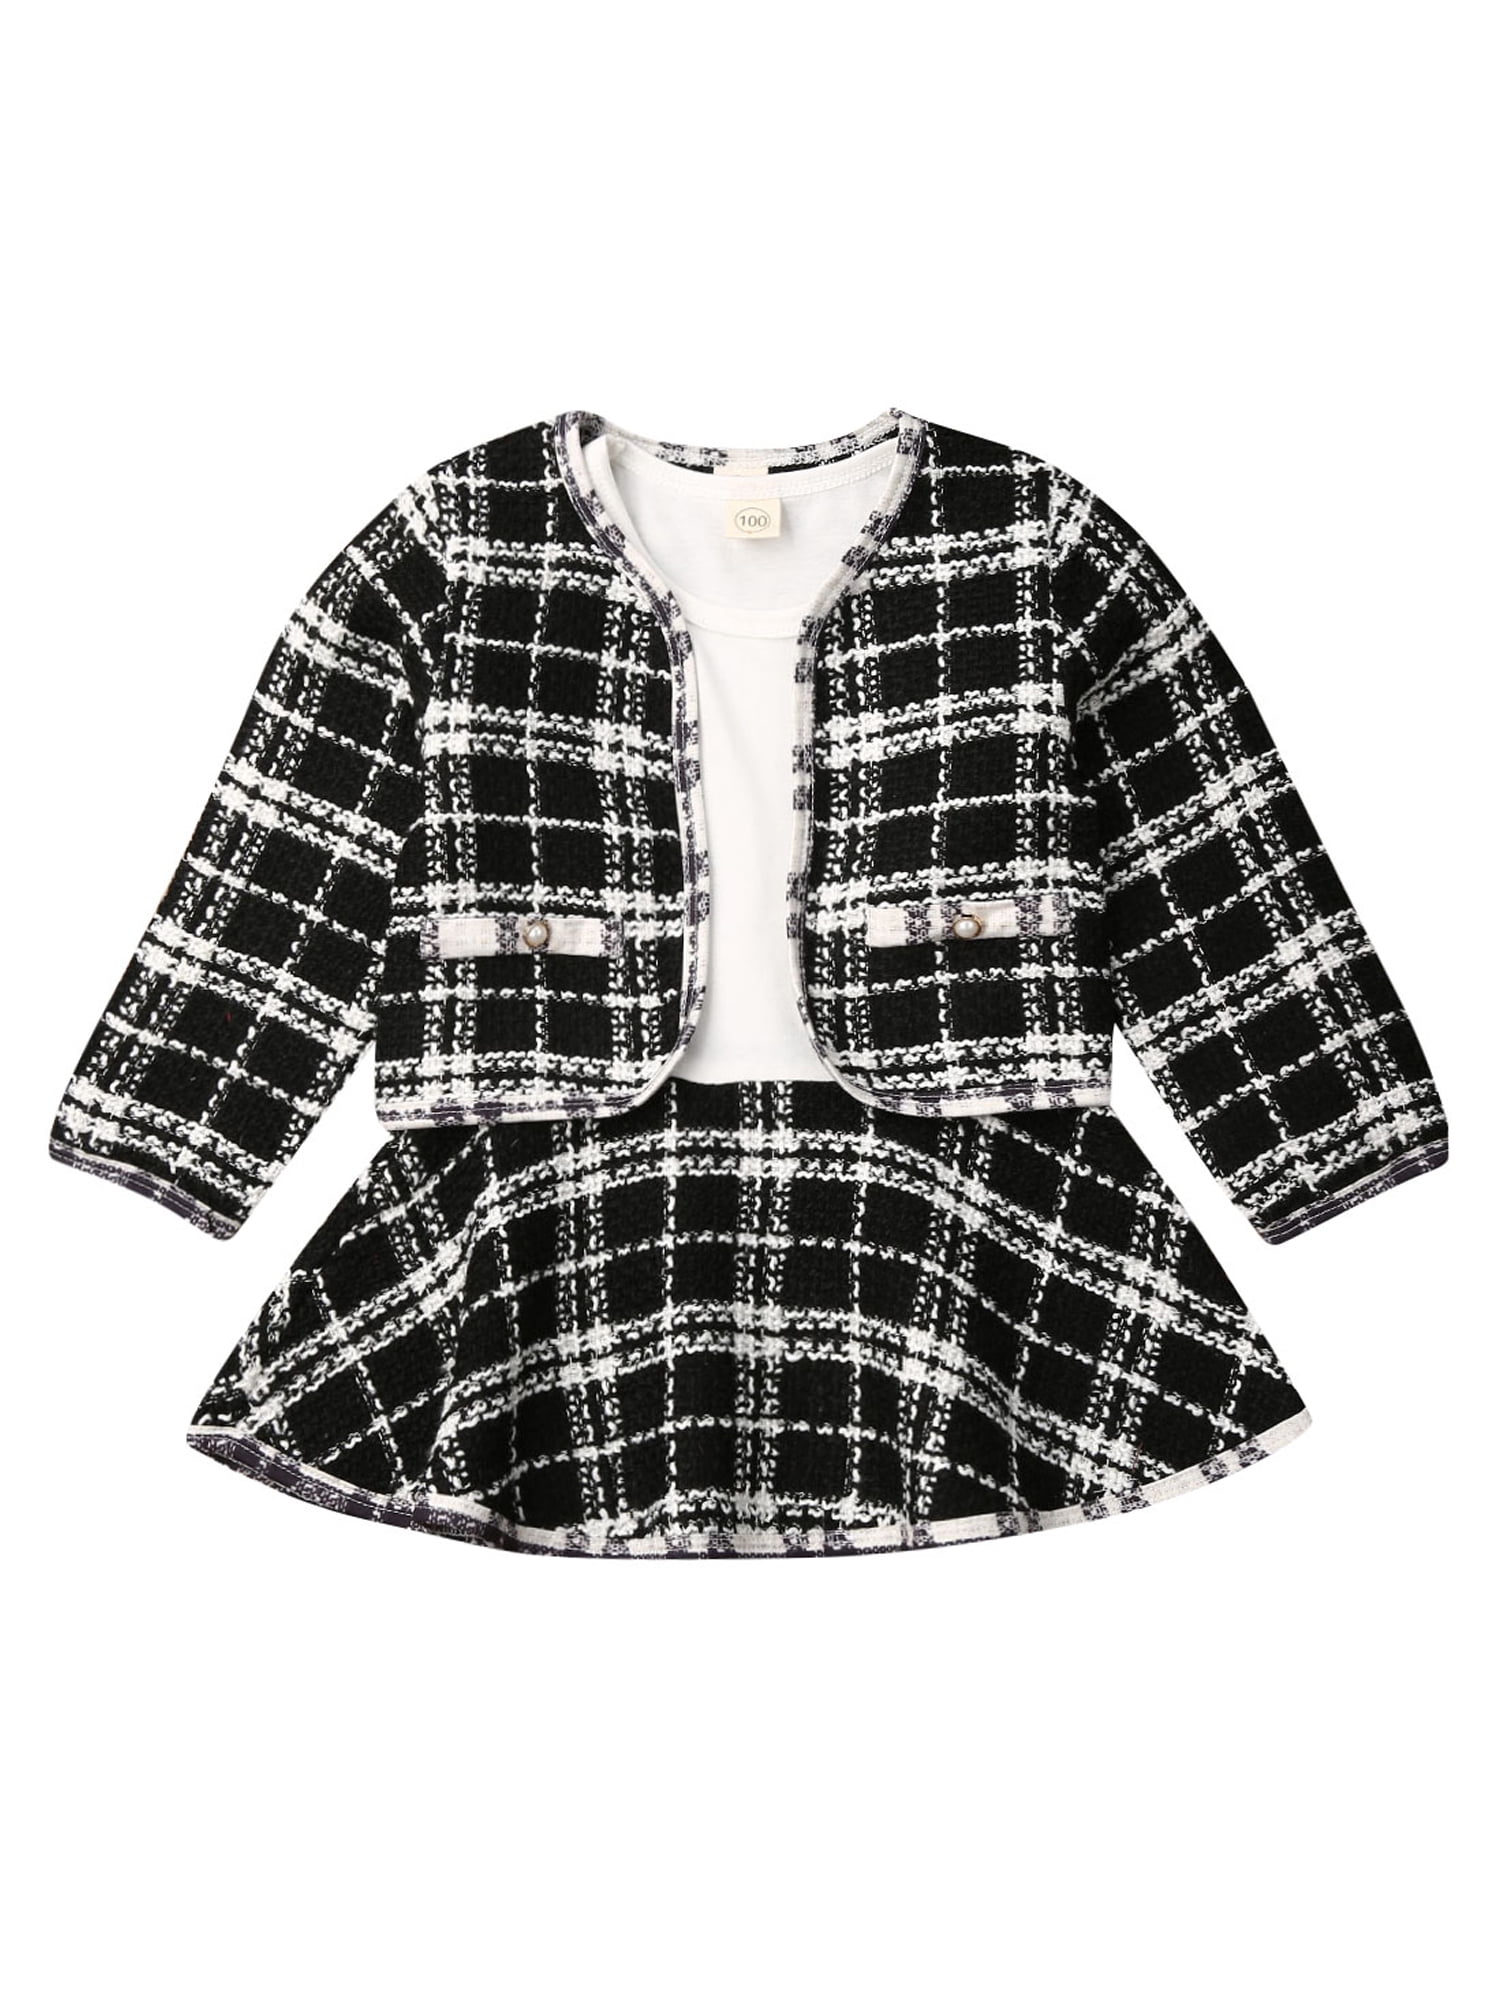 Toddler Kids Baby Girls Outfit Clothes Plaid Knitted Sweater Coat Tops Skirt Set 